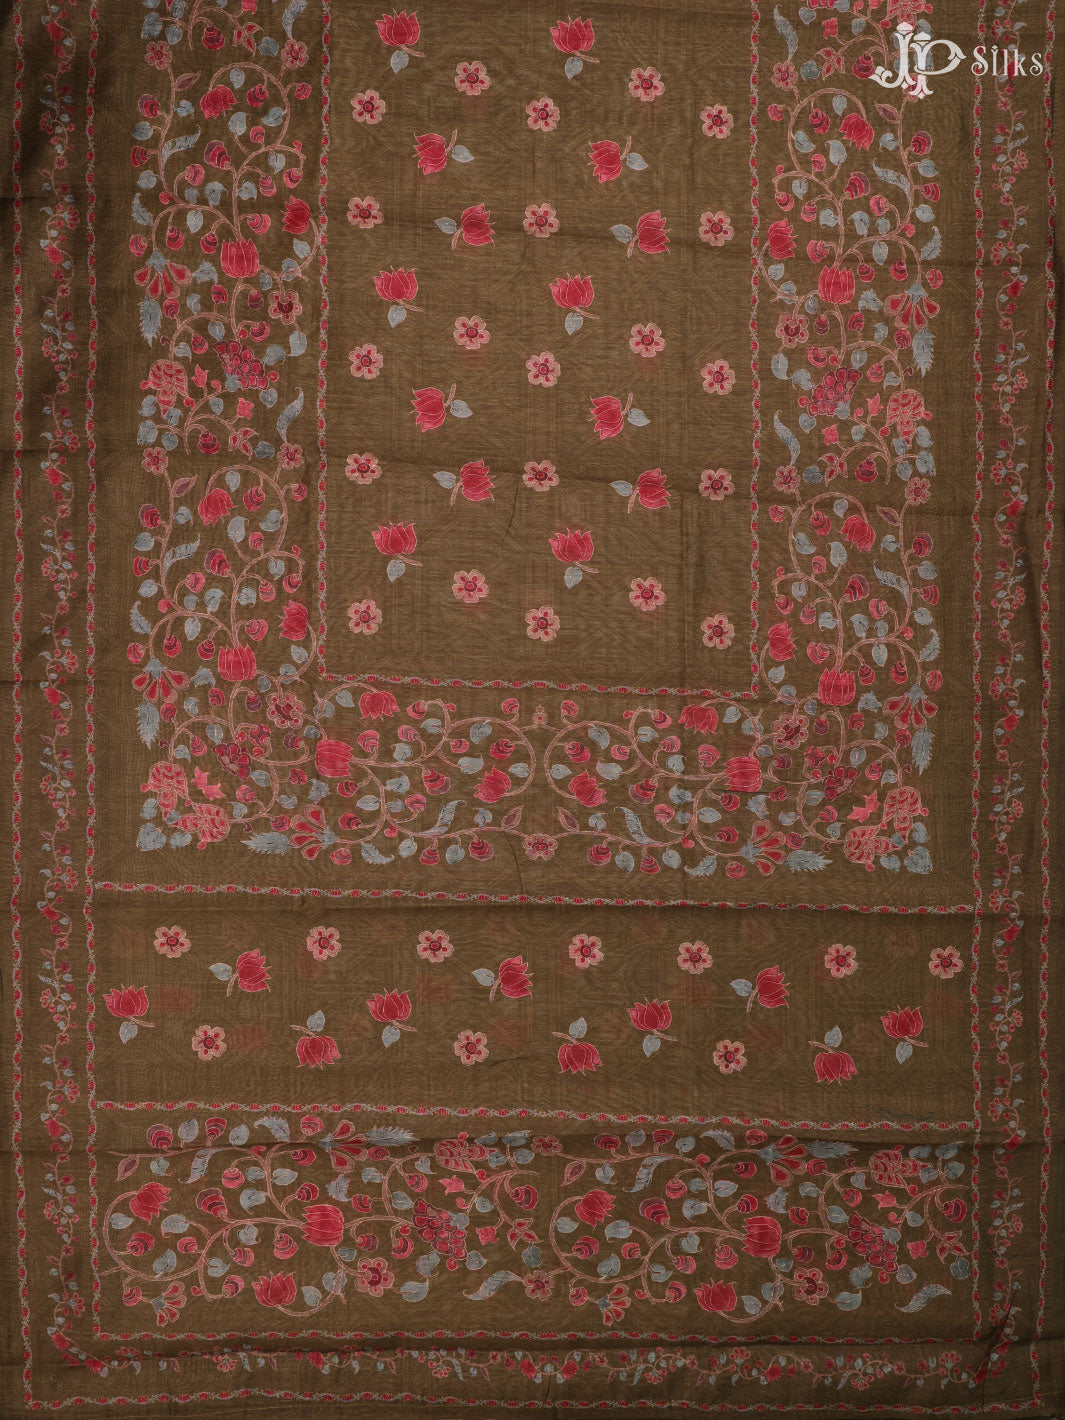 Brown Tussar Unstiched Chudidhar Material - E1902 - View 6